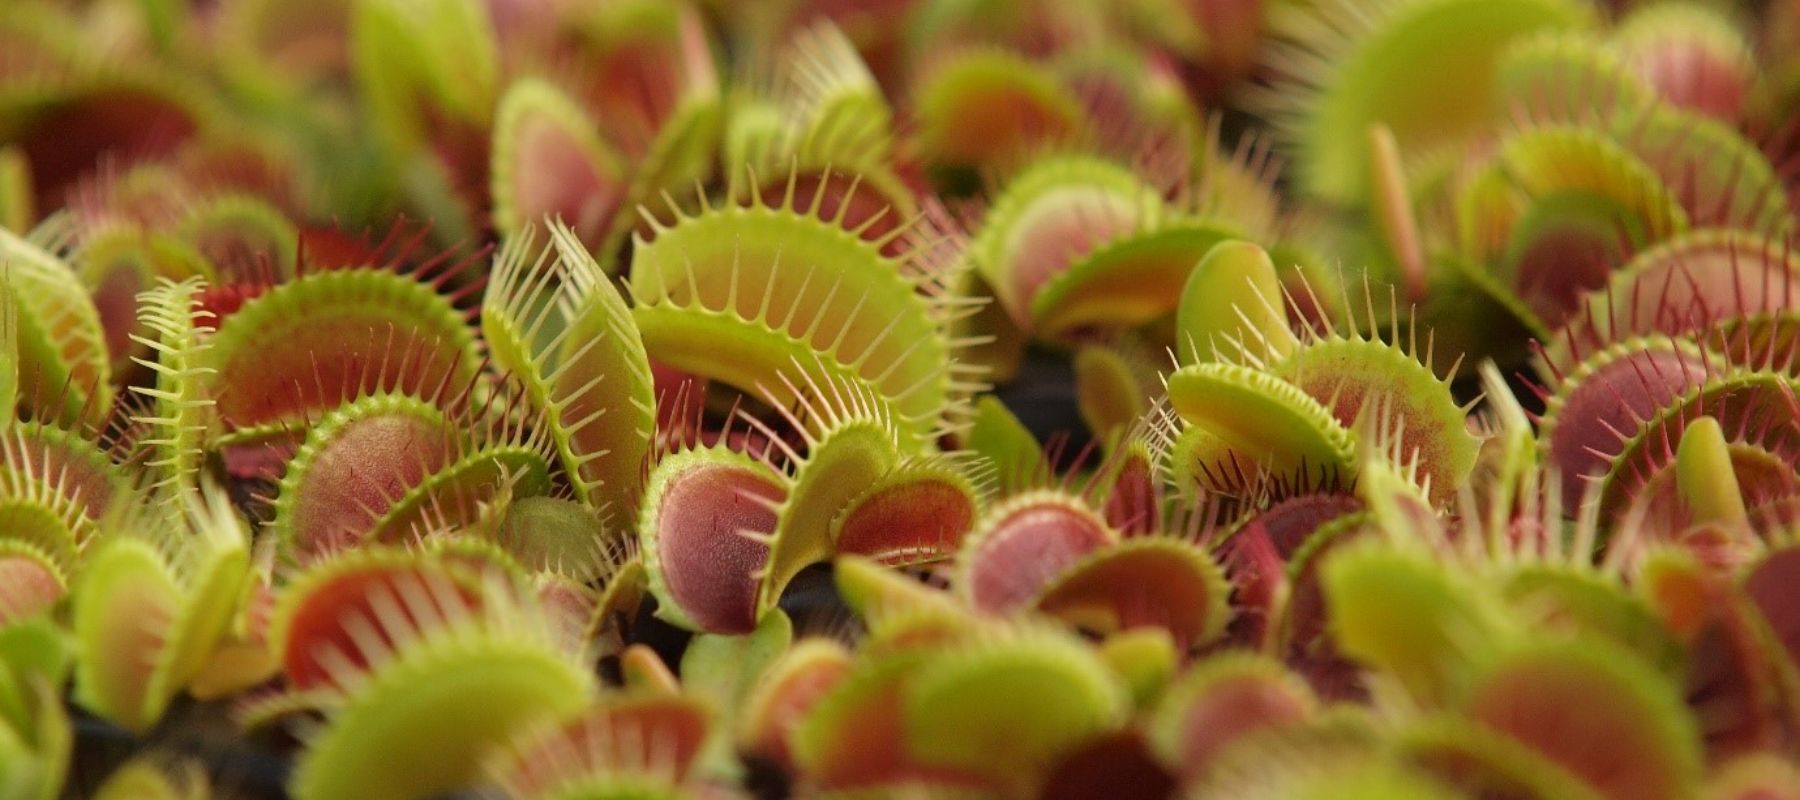 Jozi Carnivores - wide selection of carnivorous plants